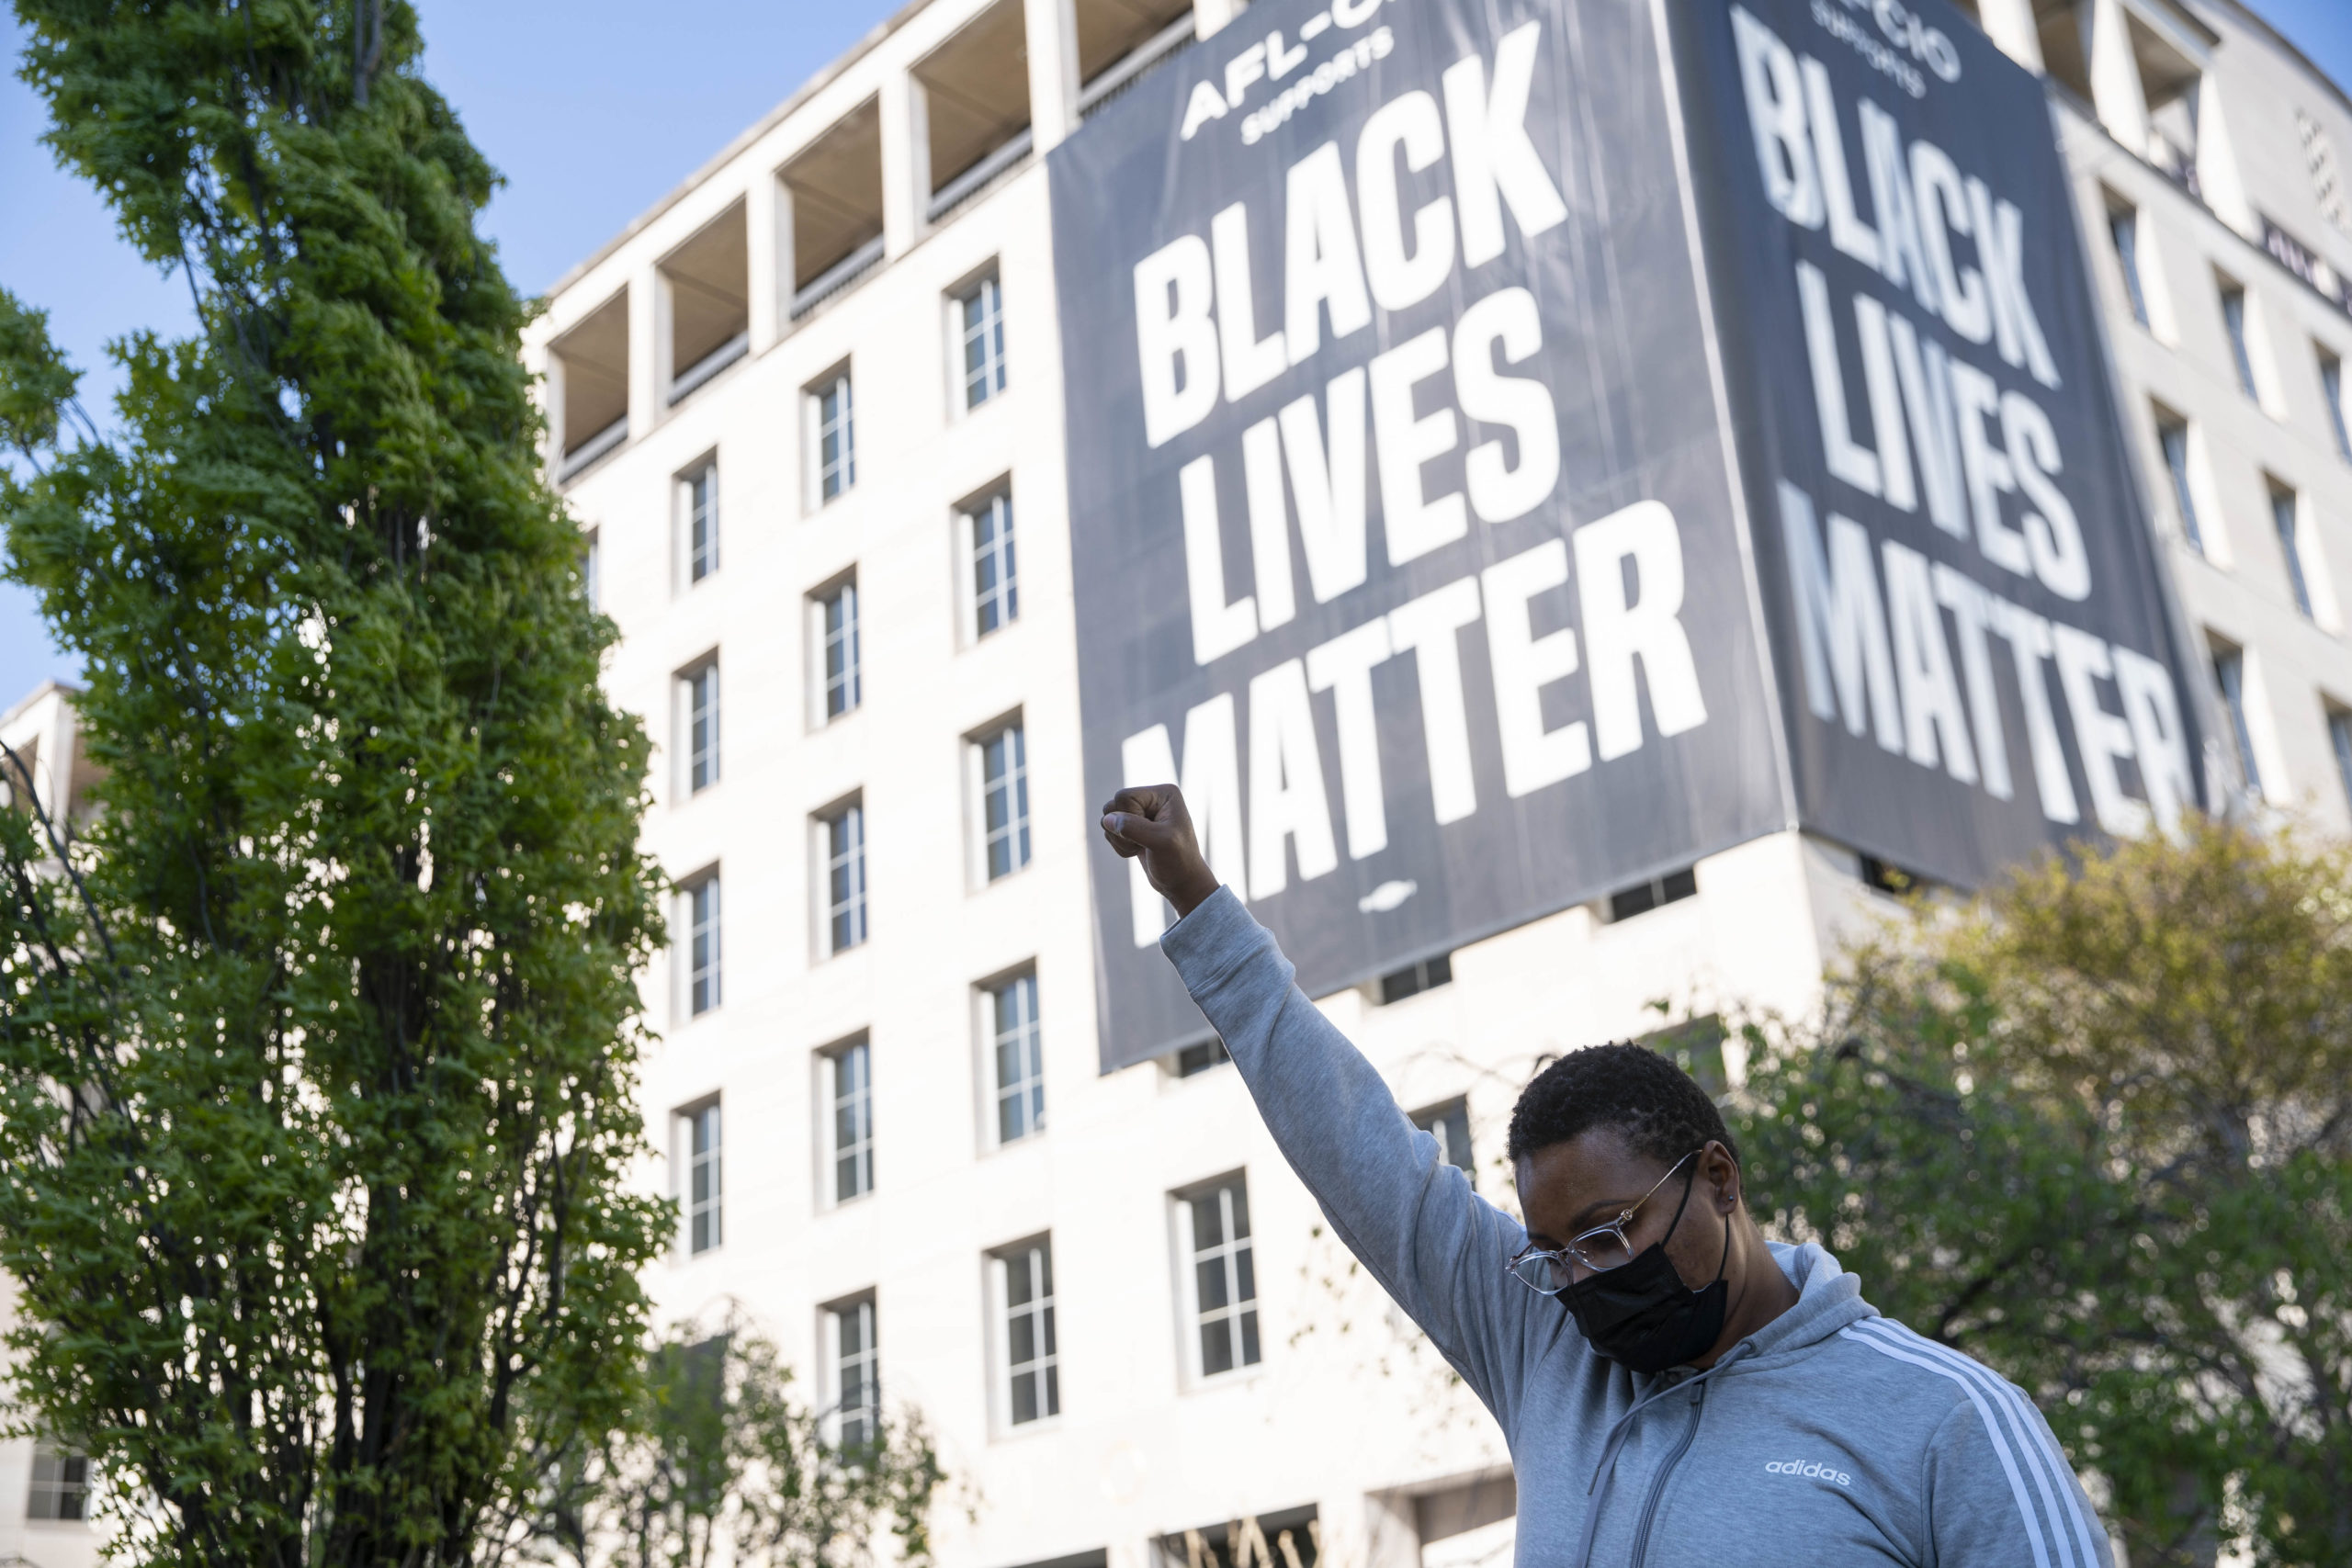 A person celebrates the verdict of the Derek Chauvin trial at Black Lives Matter Plaza near the White House on April 20, 2021. (Photo by Sarah Silbiger/Getty Images)